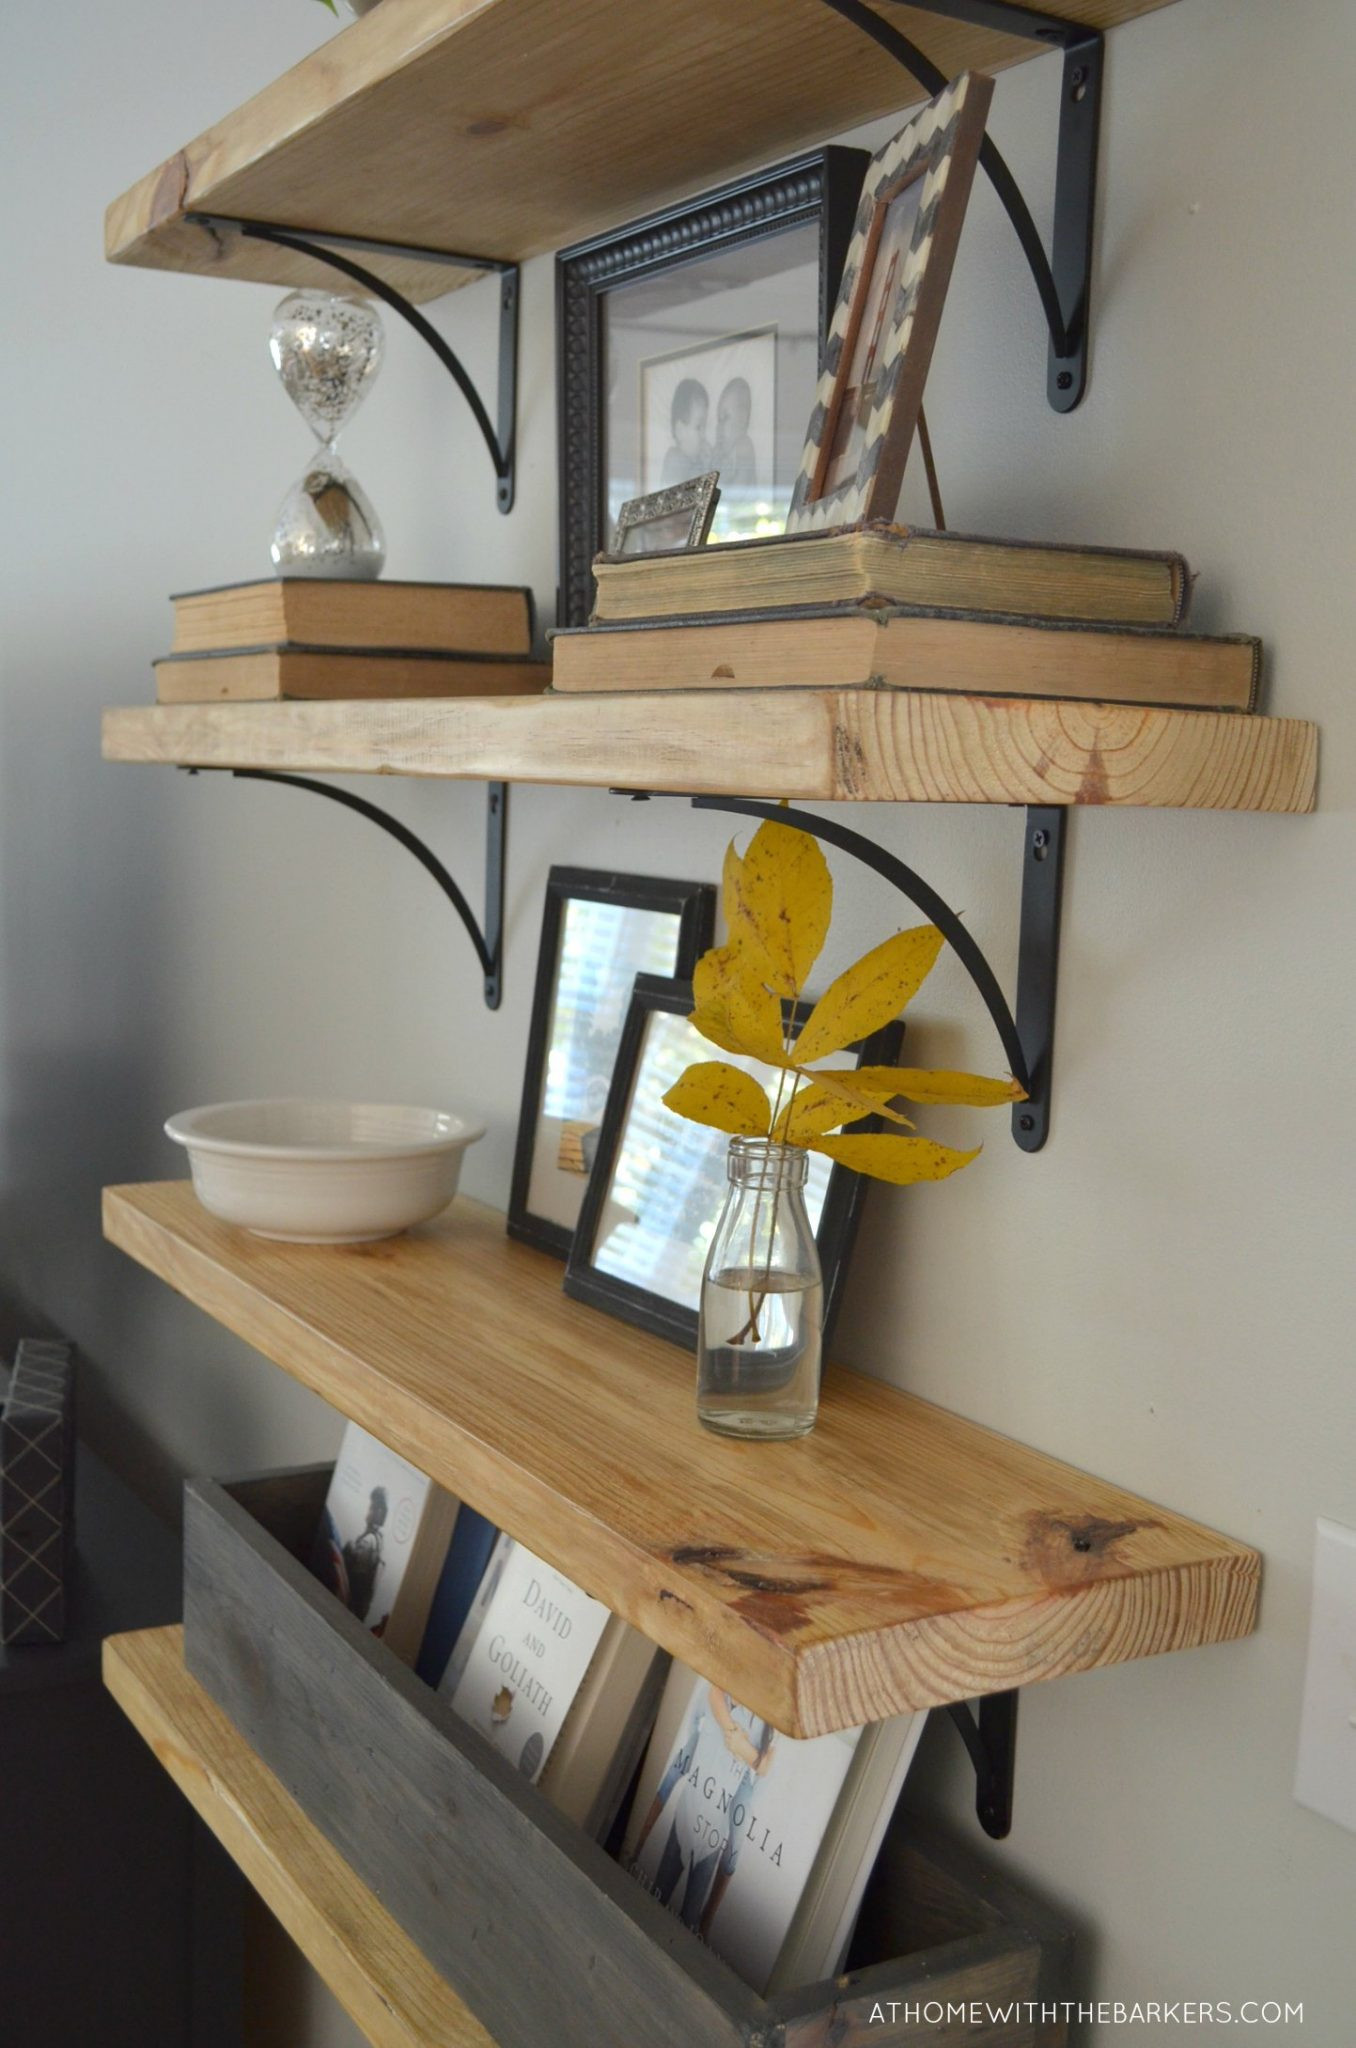 DIY Shelf Organizer
 DIY Rustic Wood Shelves At Home with The Barkers